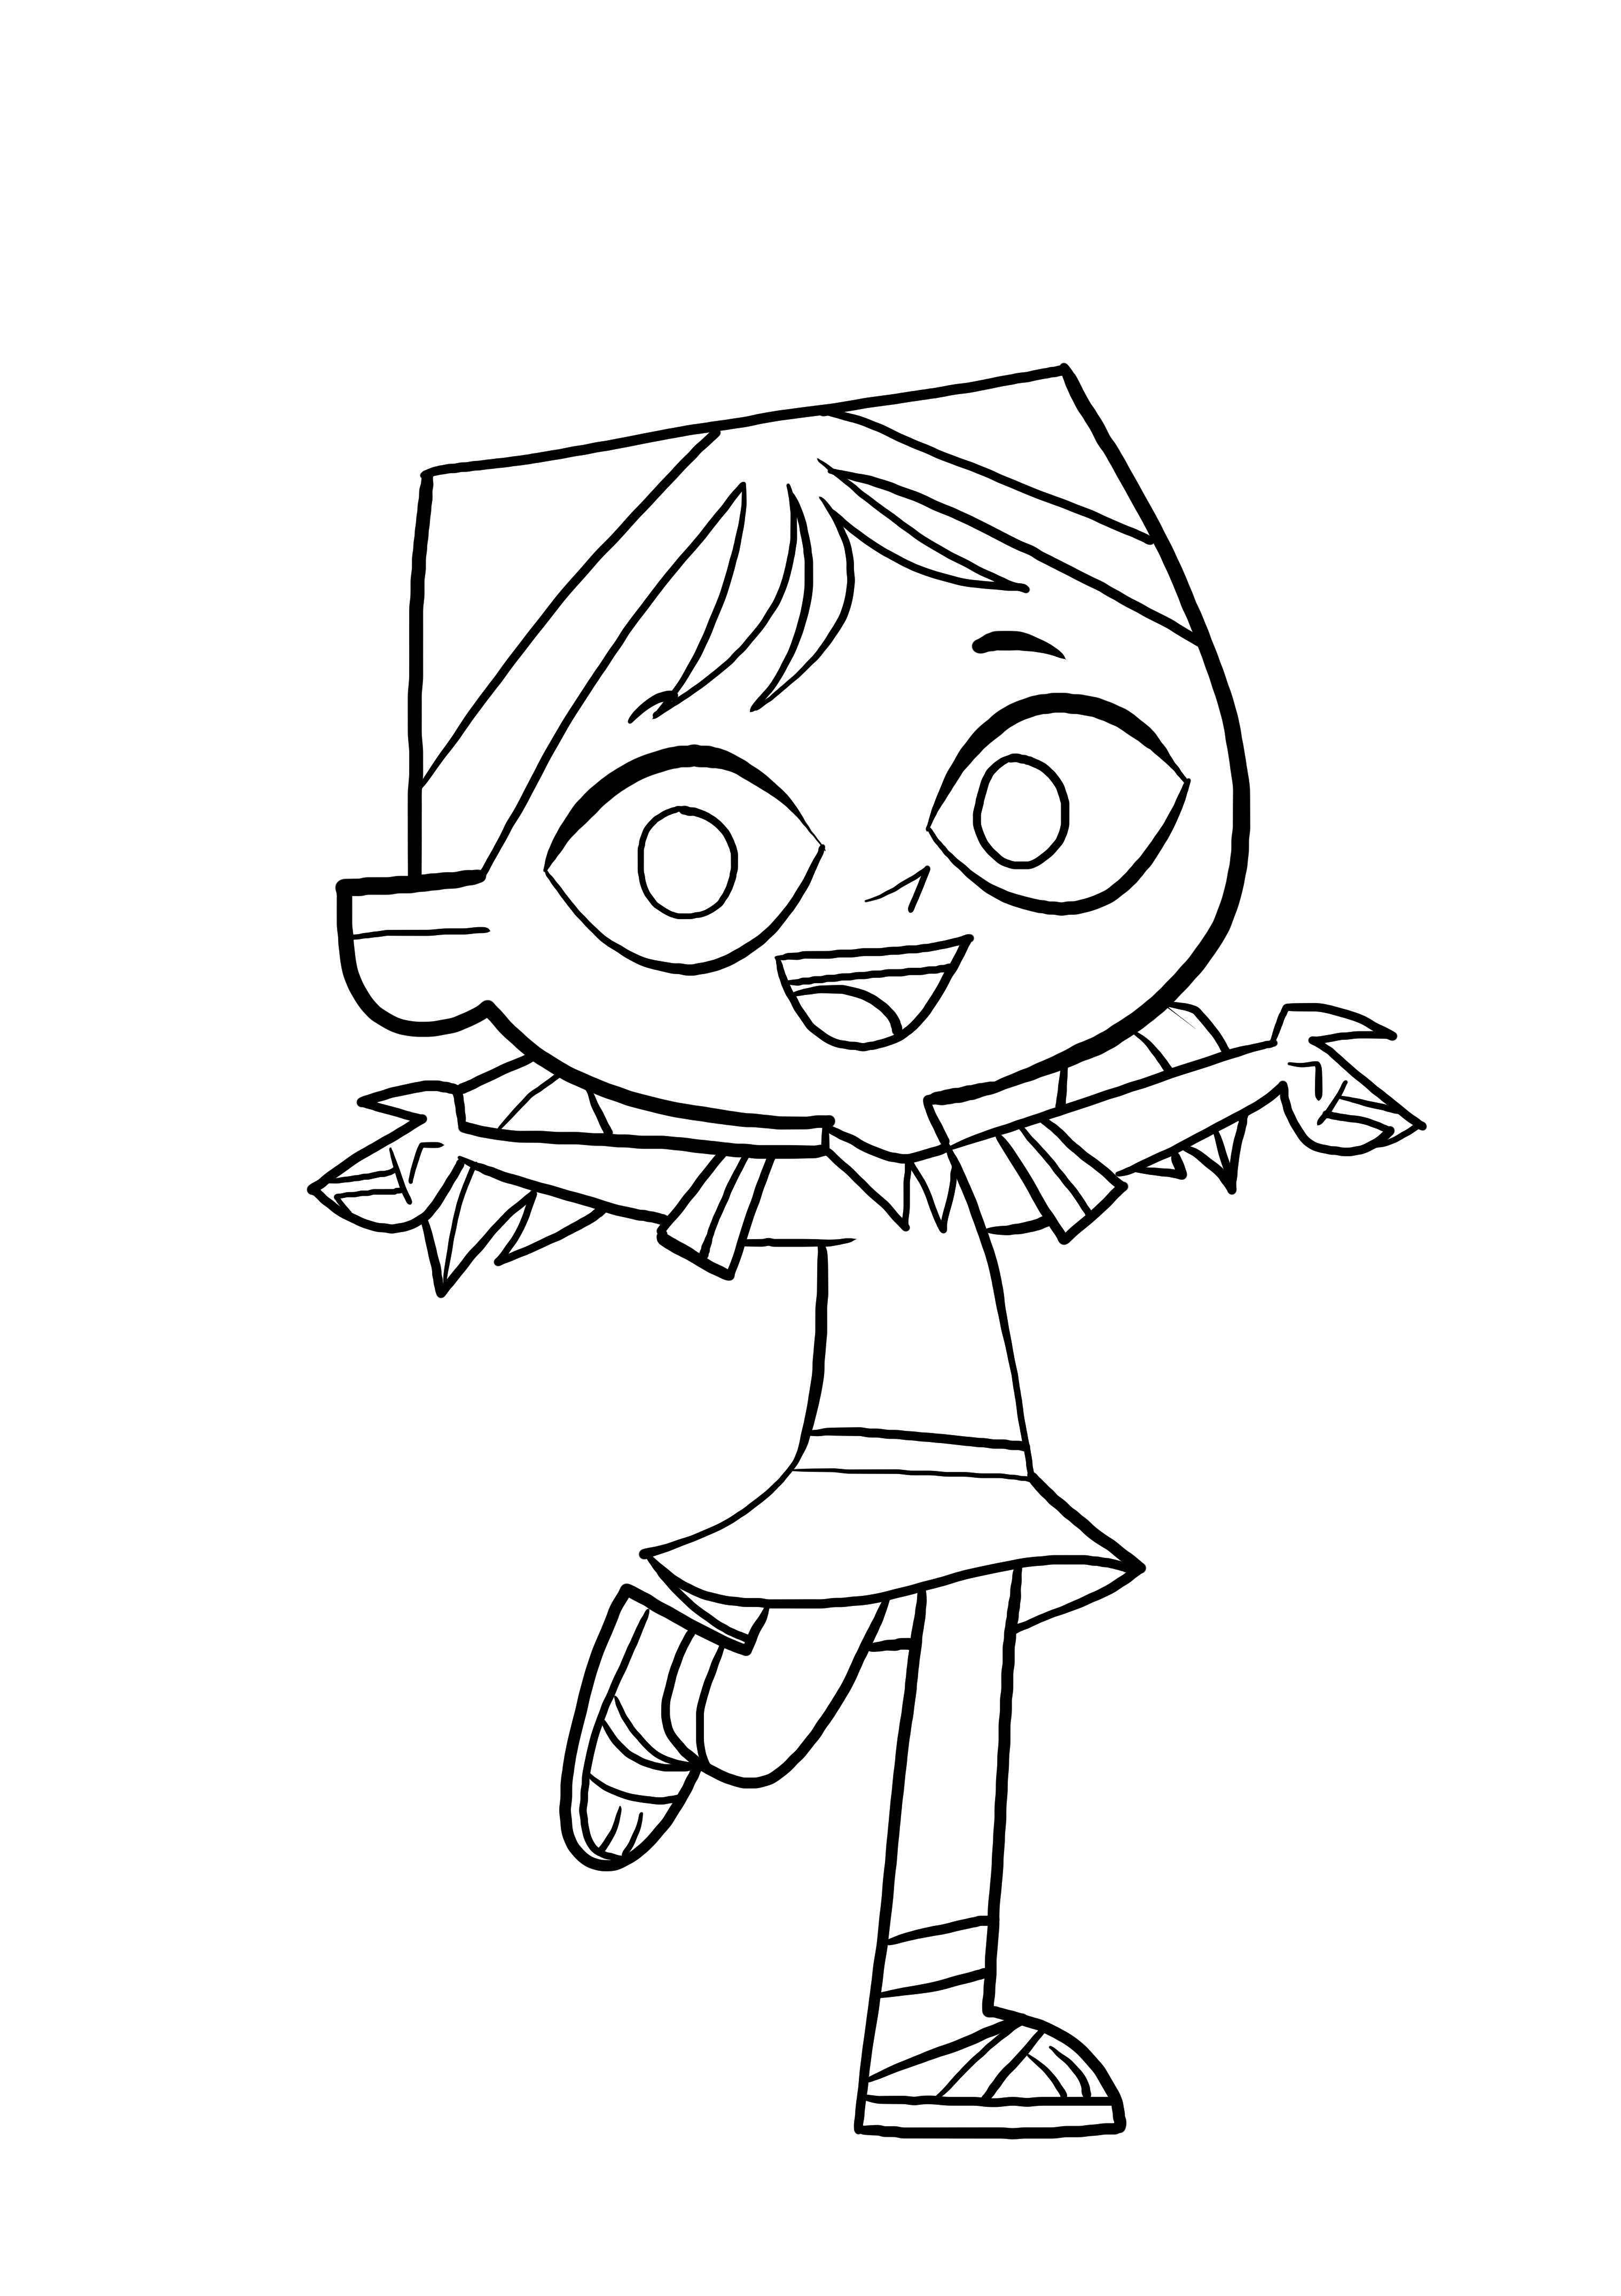 Courtney from Total DramaRama coloring page